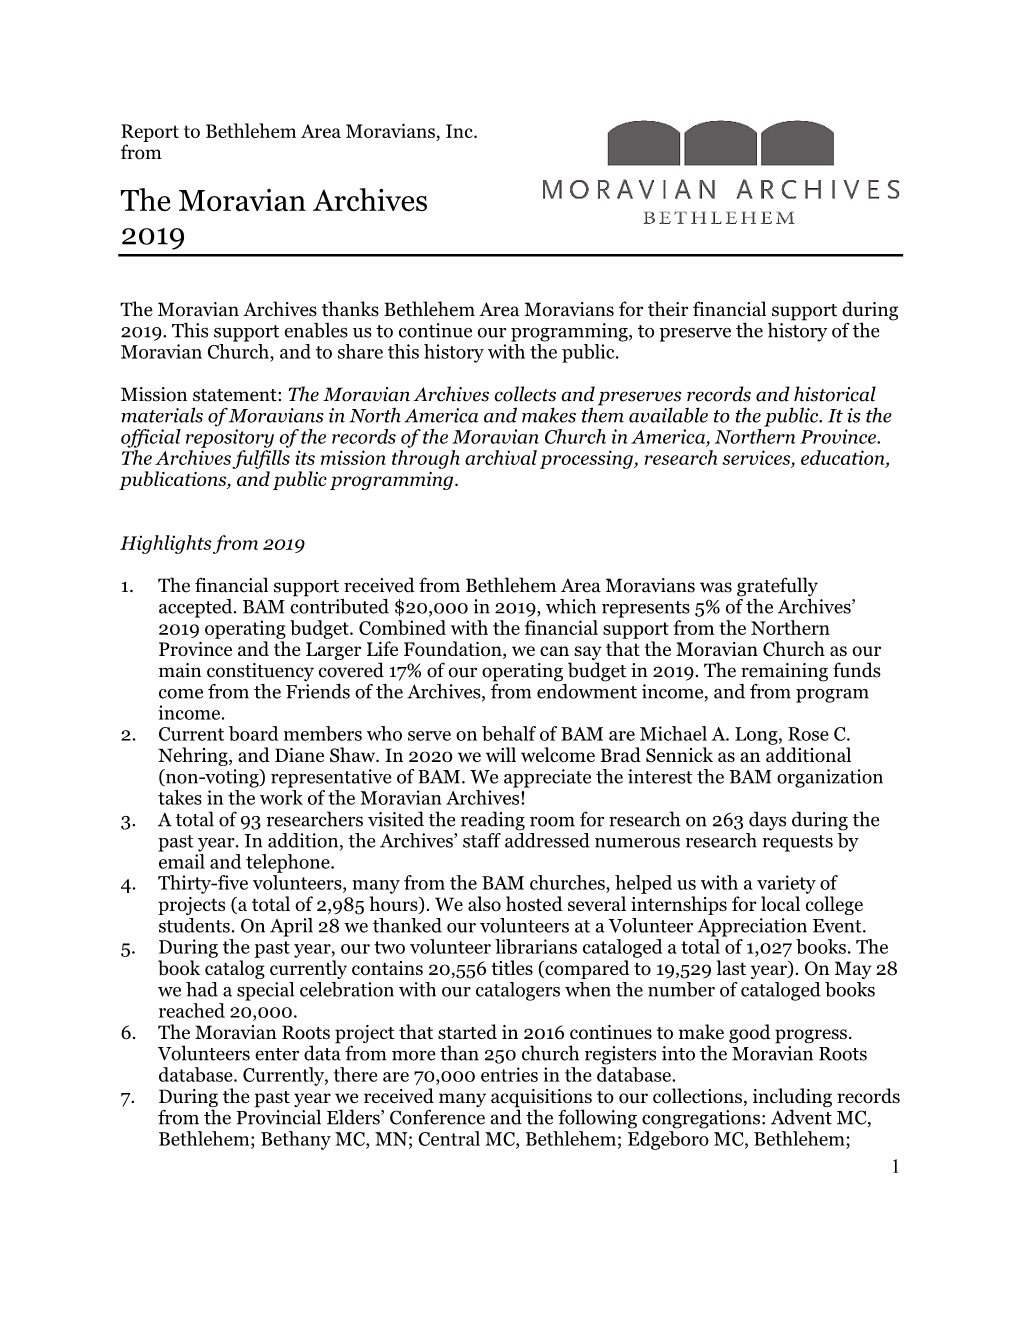 The Moravian Archives 2019